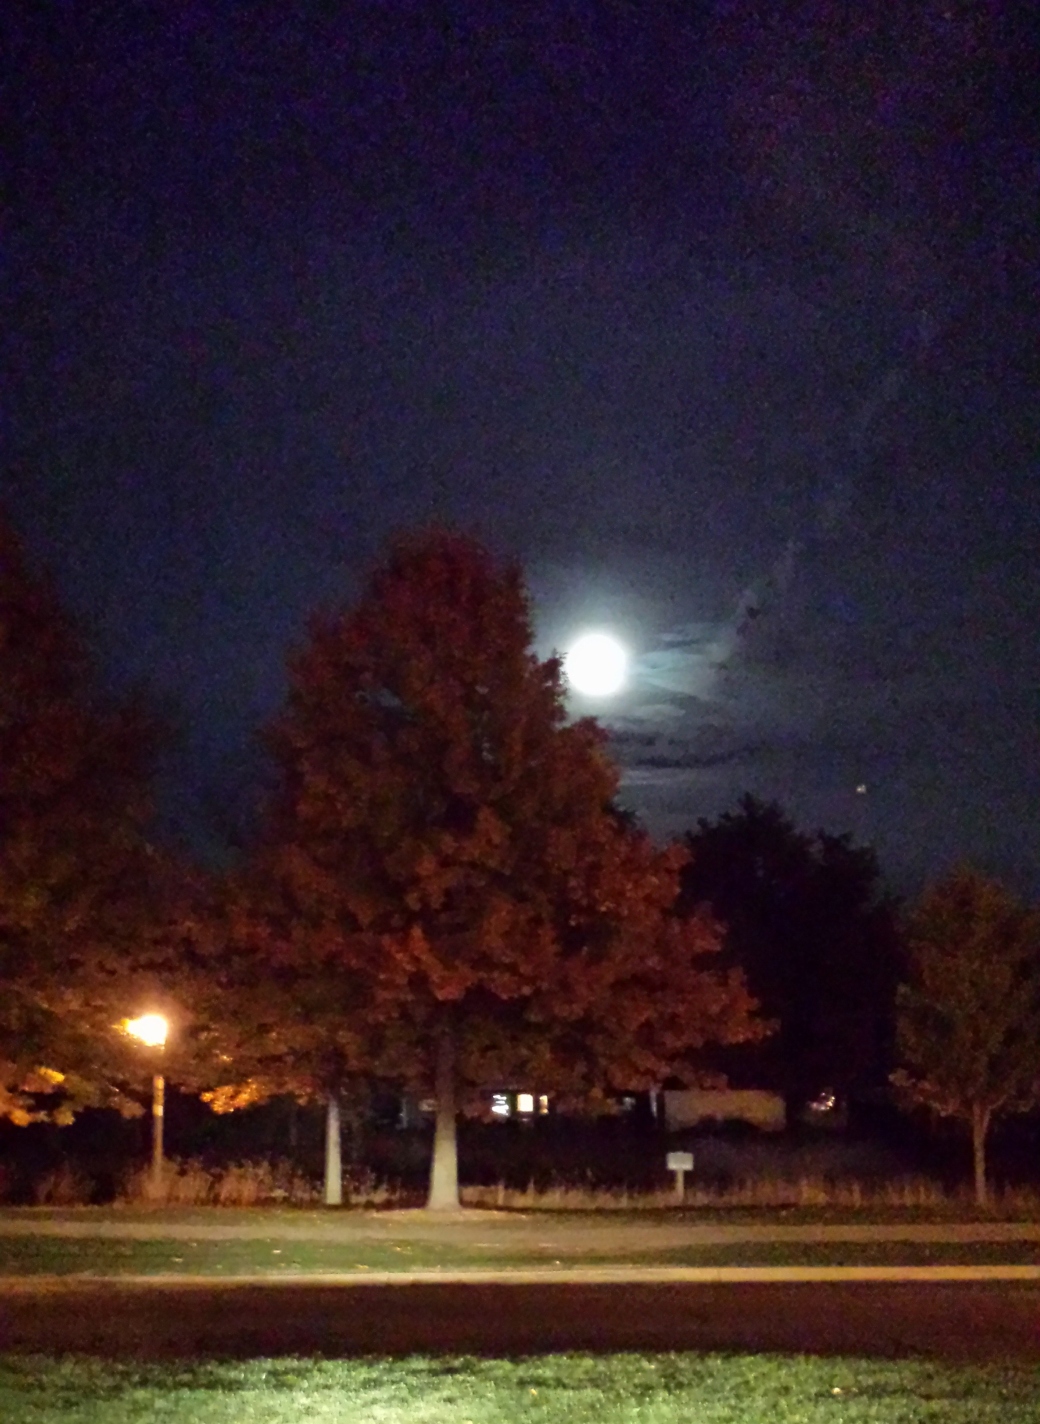 Full moon appears above a red maple tree - Prairie Lakes parking lot.